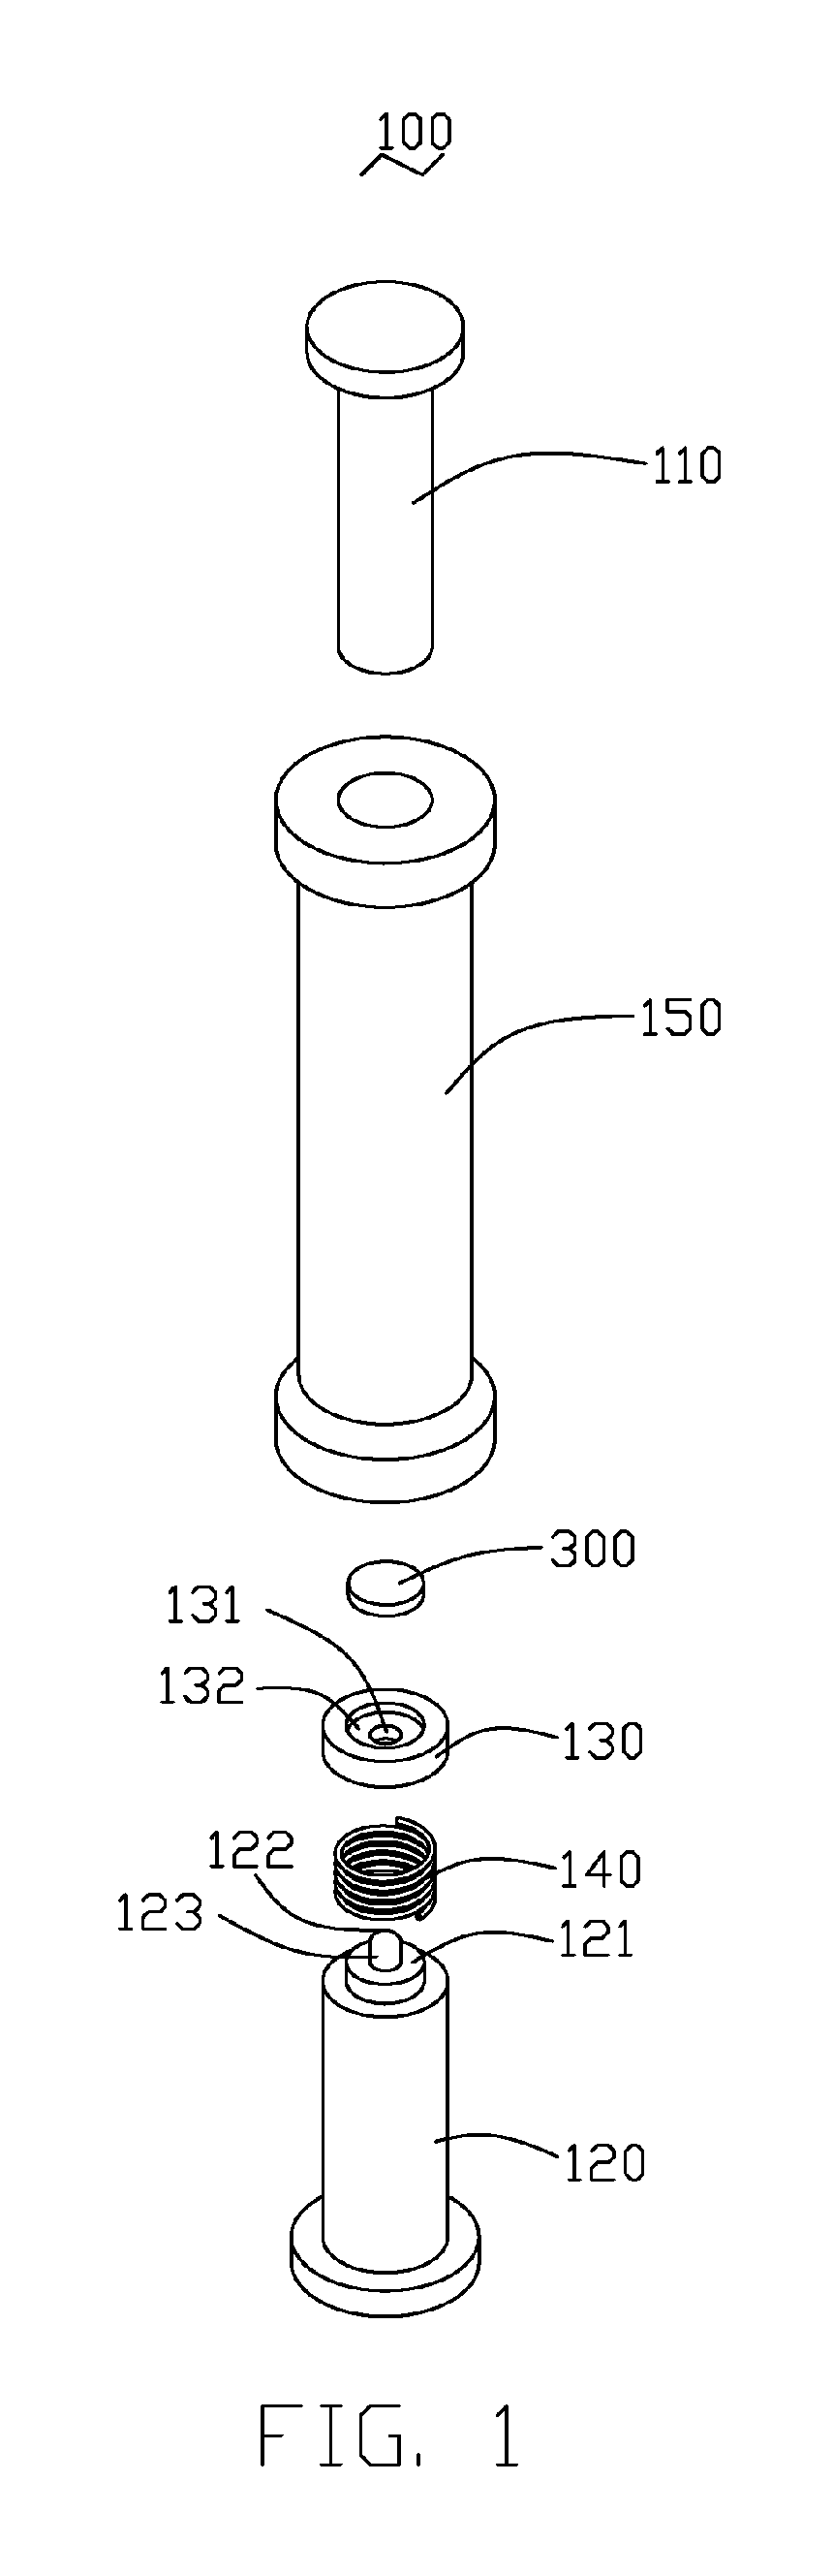 Molding apparatus for optical elements